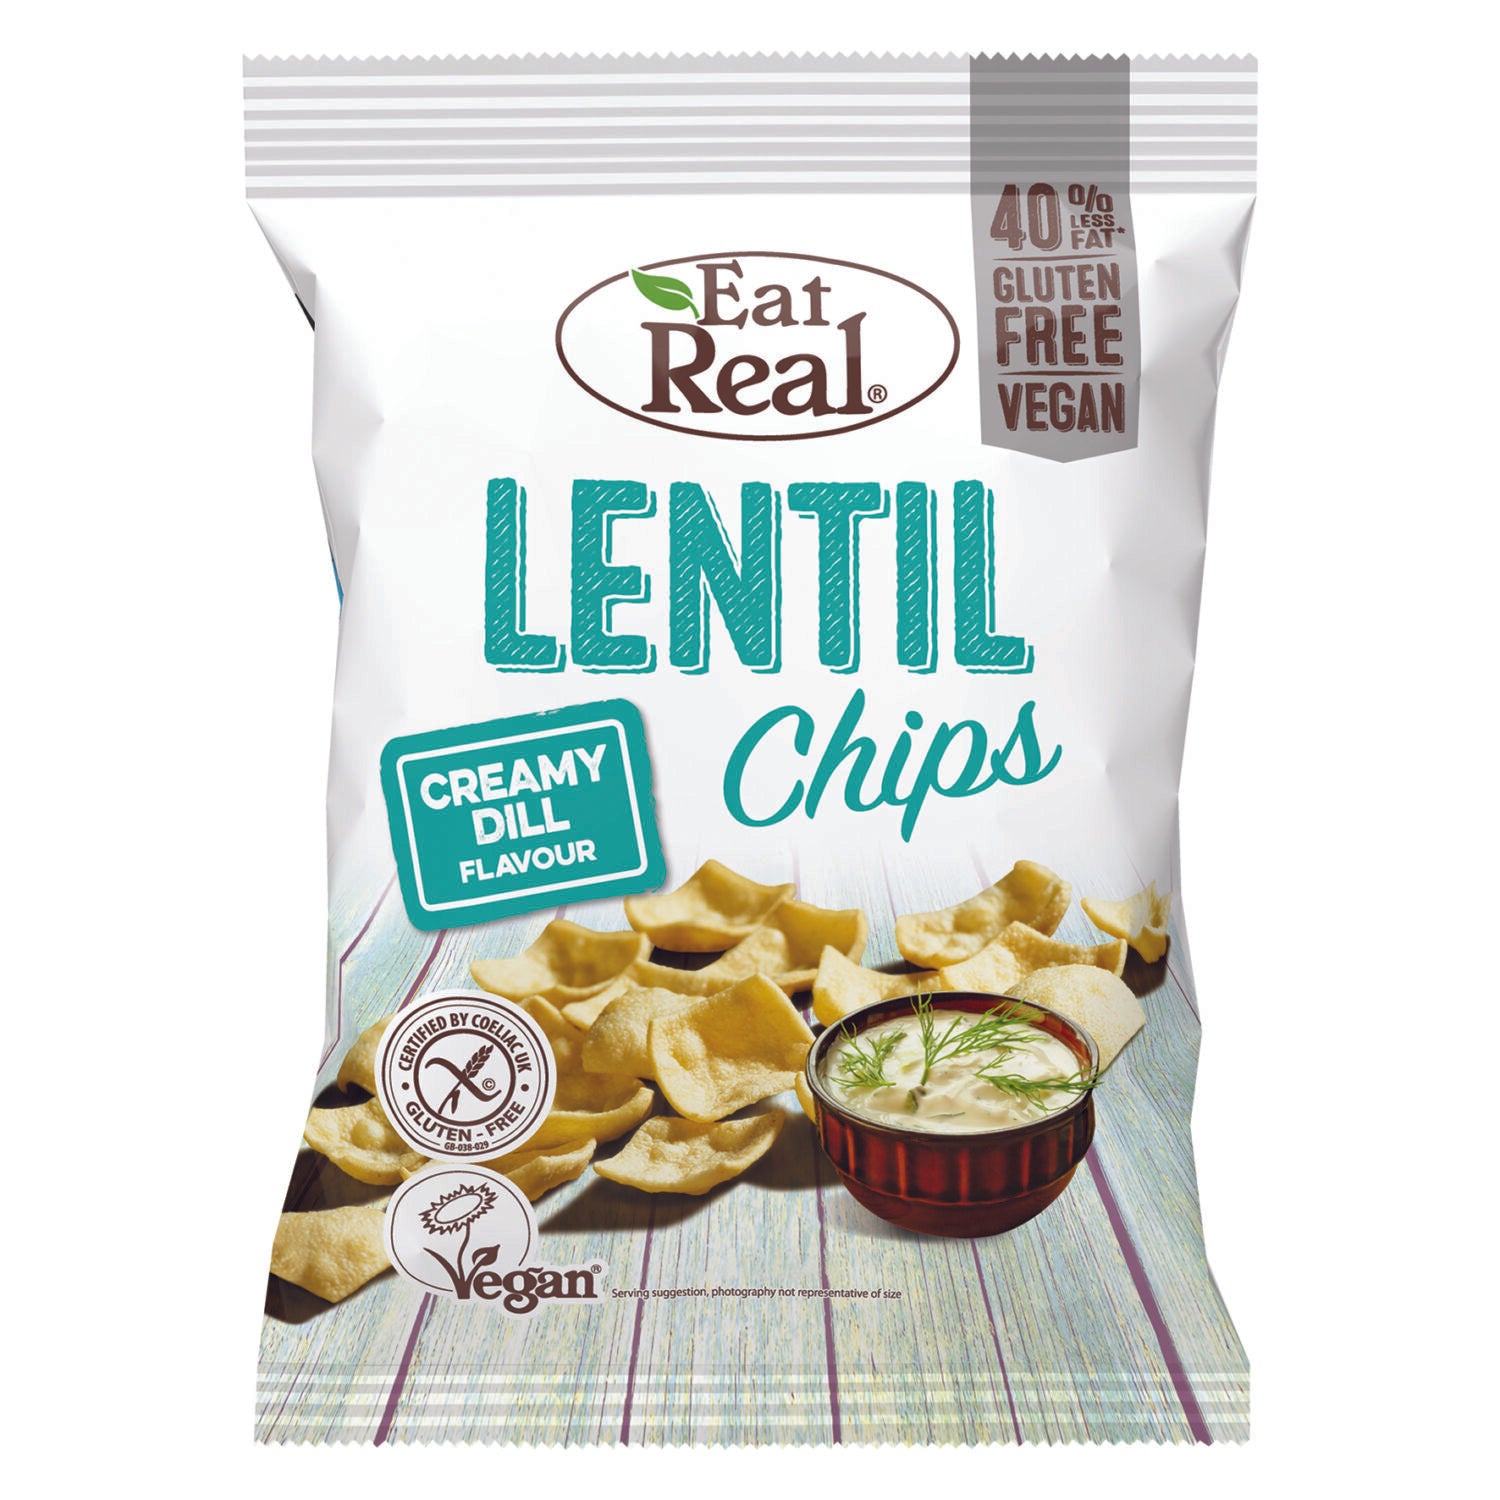 Eat Real Lentil Chips "Creamy Dill"